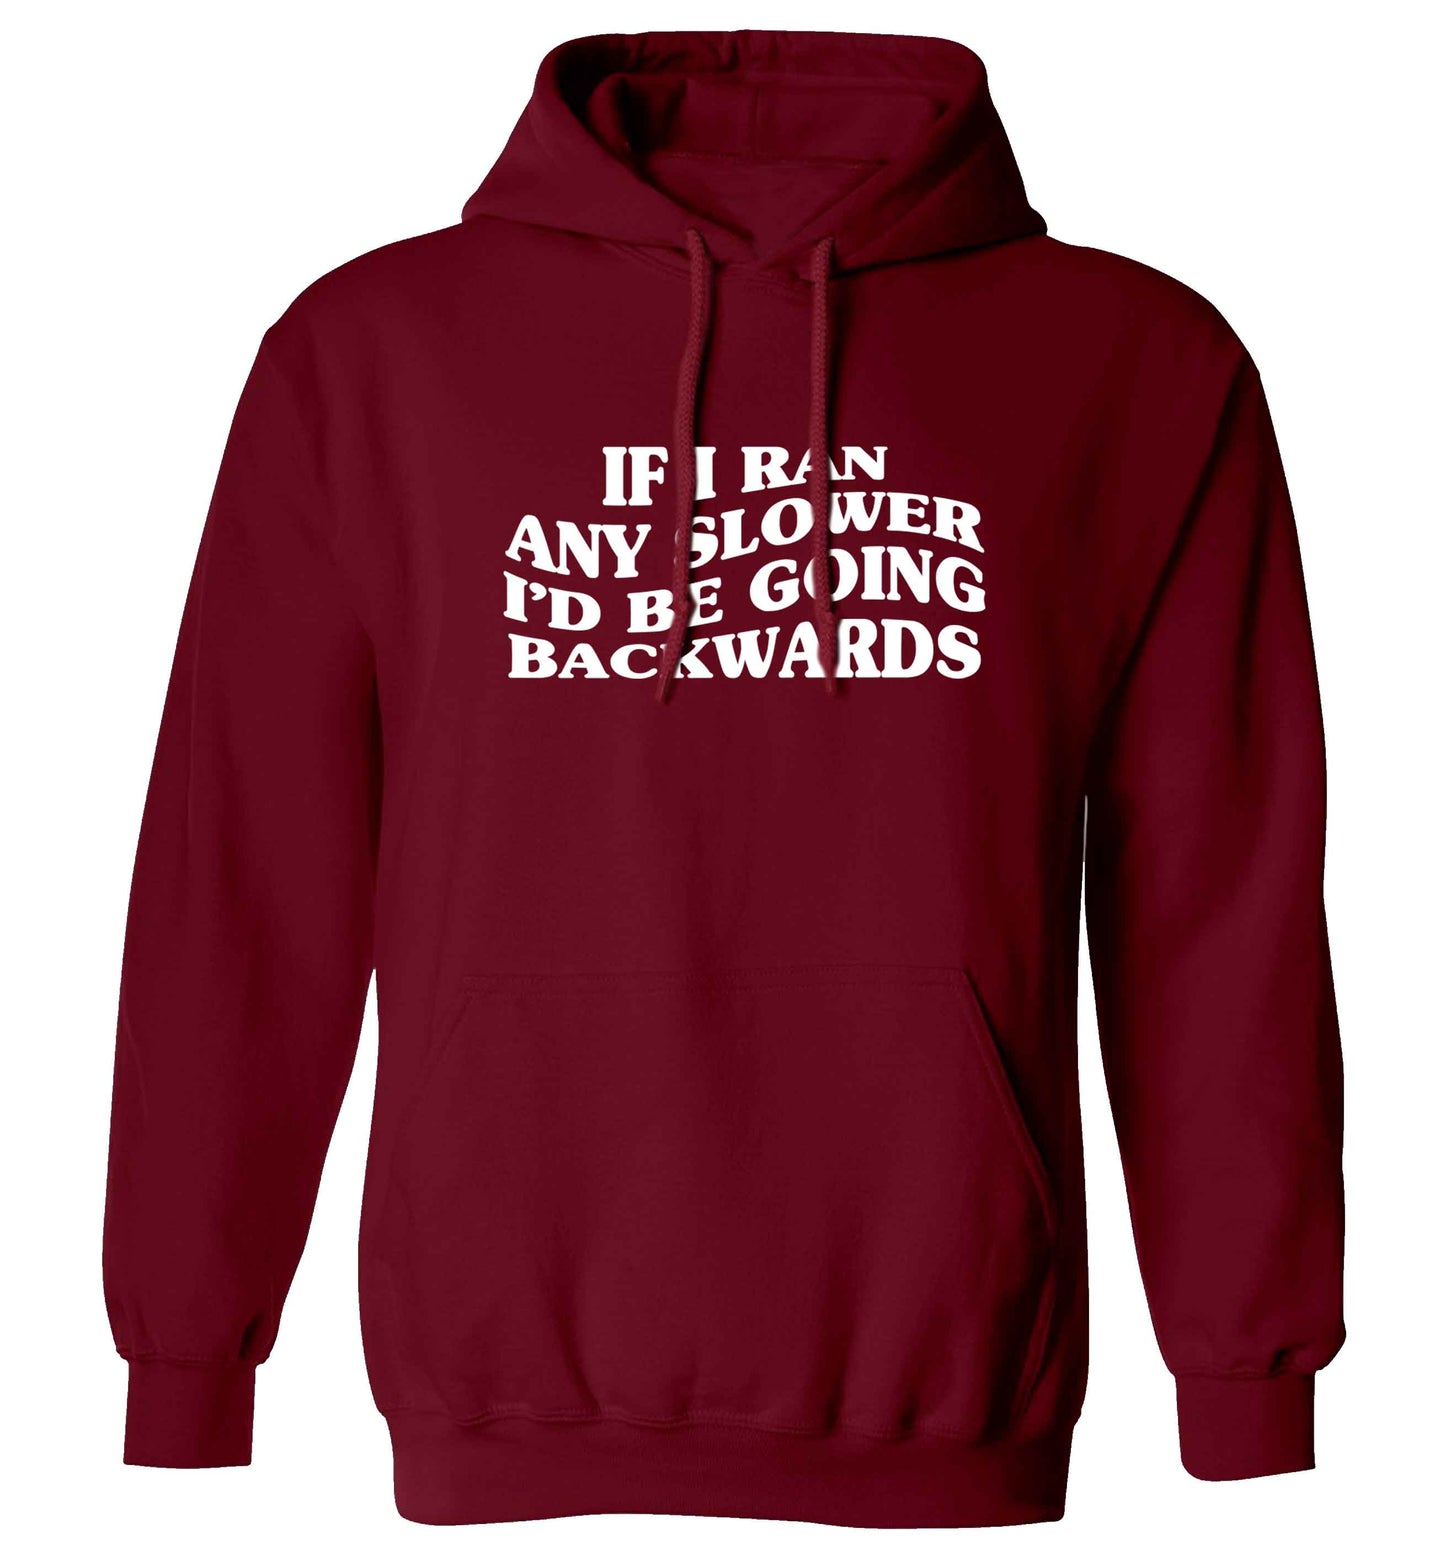 If I ran any slower I'd be going backwards adults unisex maroon hoodie 2XL